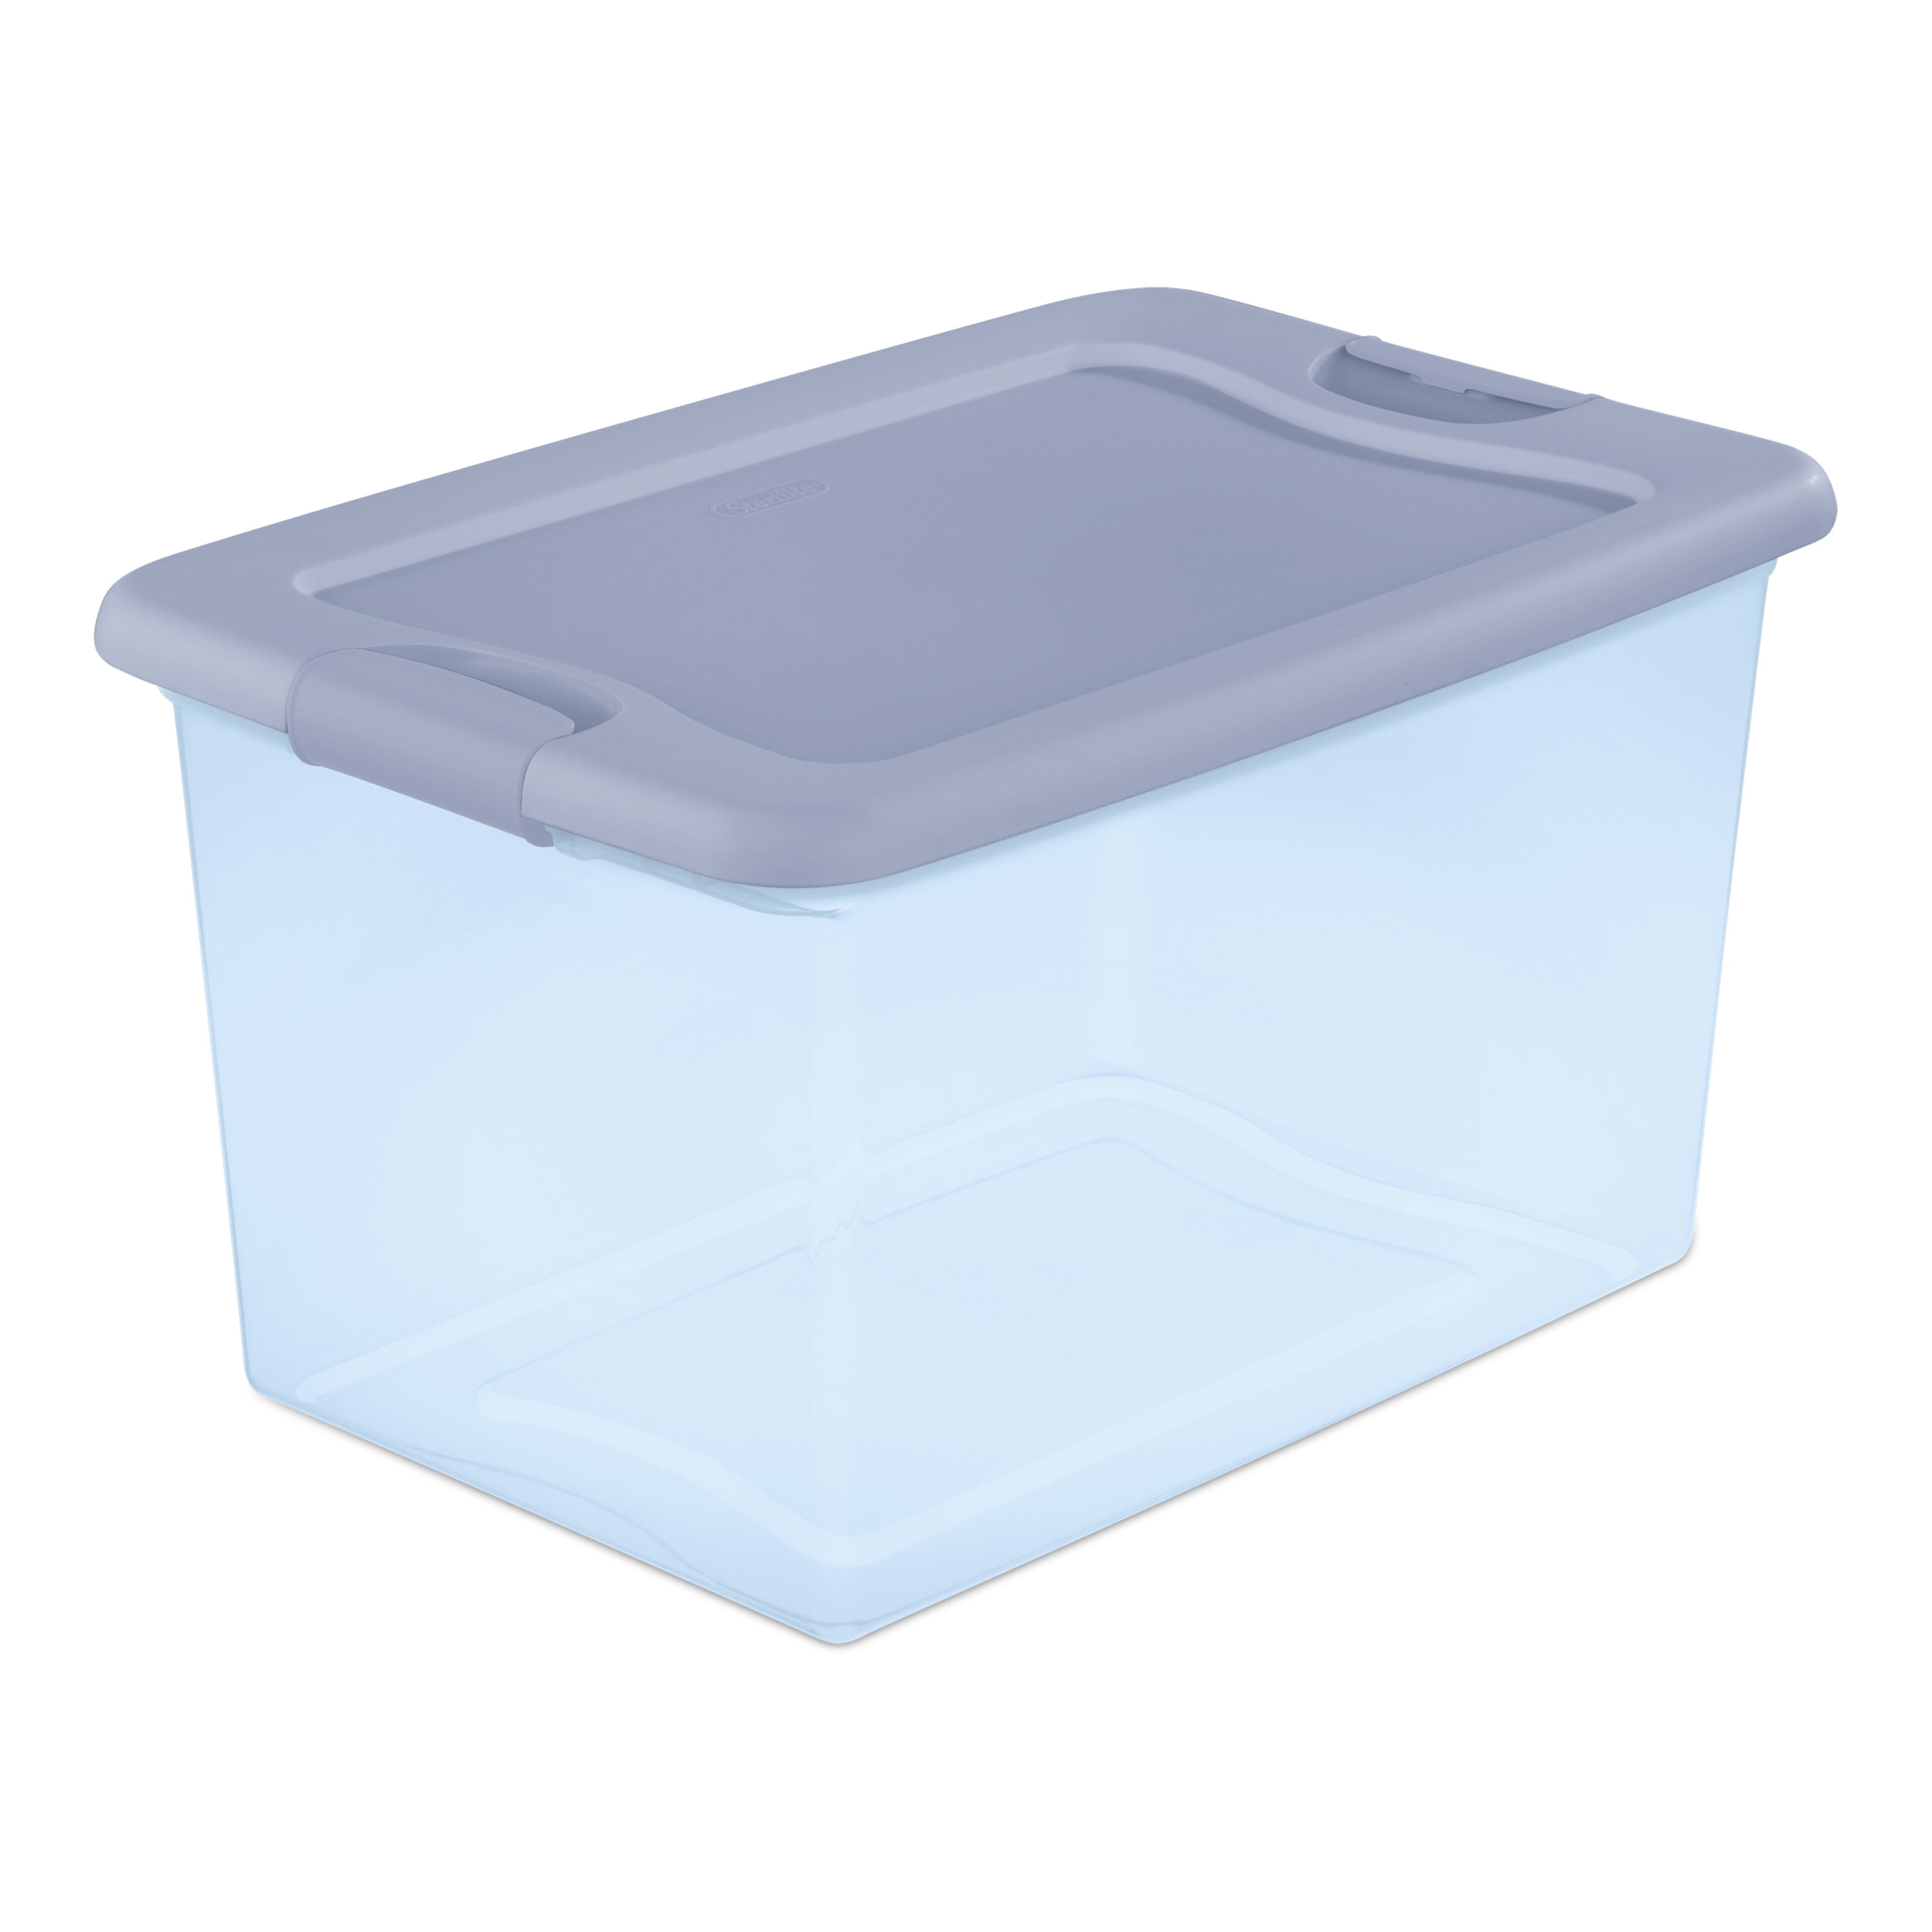  LALAFINA 5pcs Box Plastic Container with Lid Clear